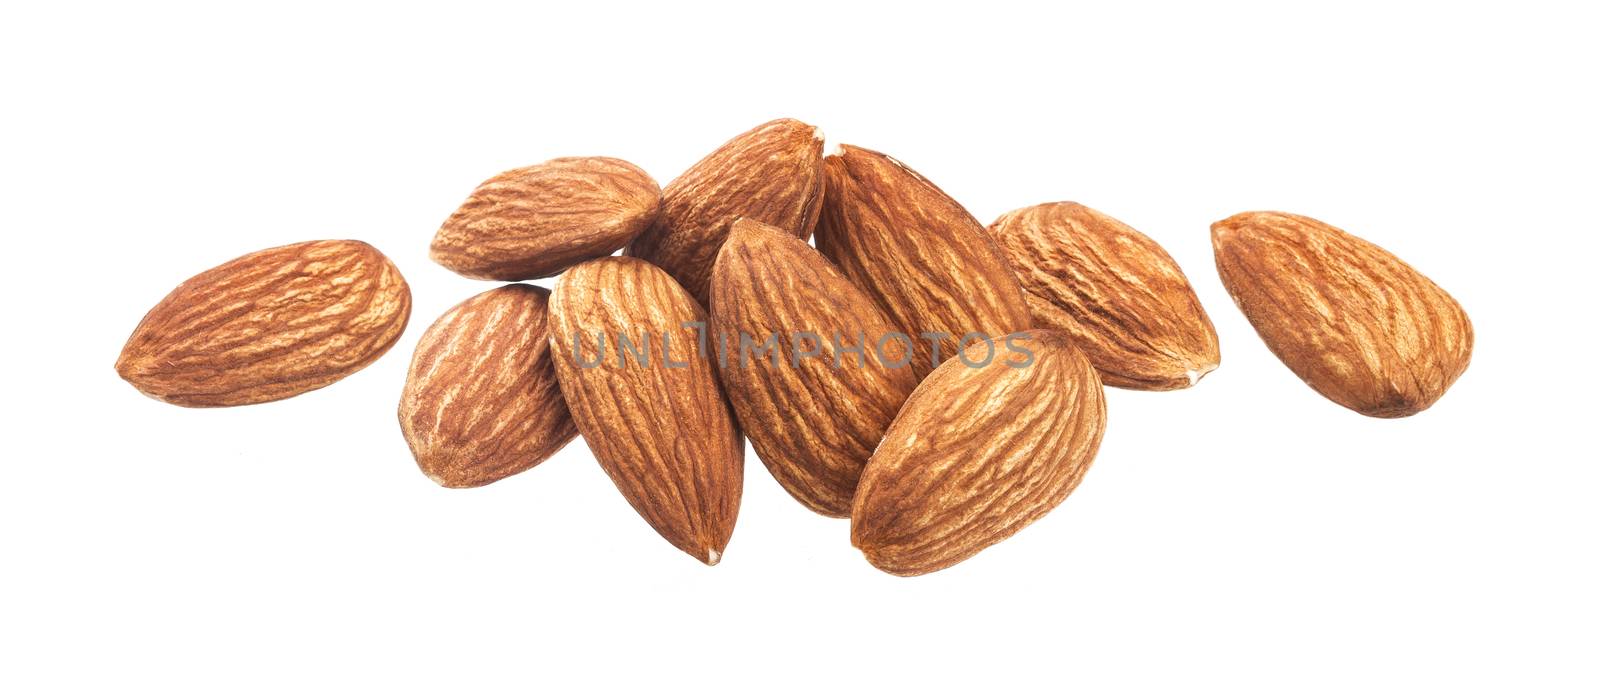 Heap of almond nuts isolated on a white background by xamtiw